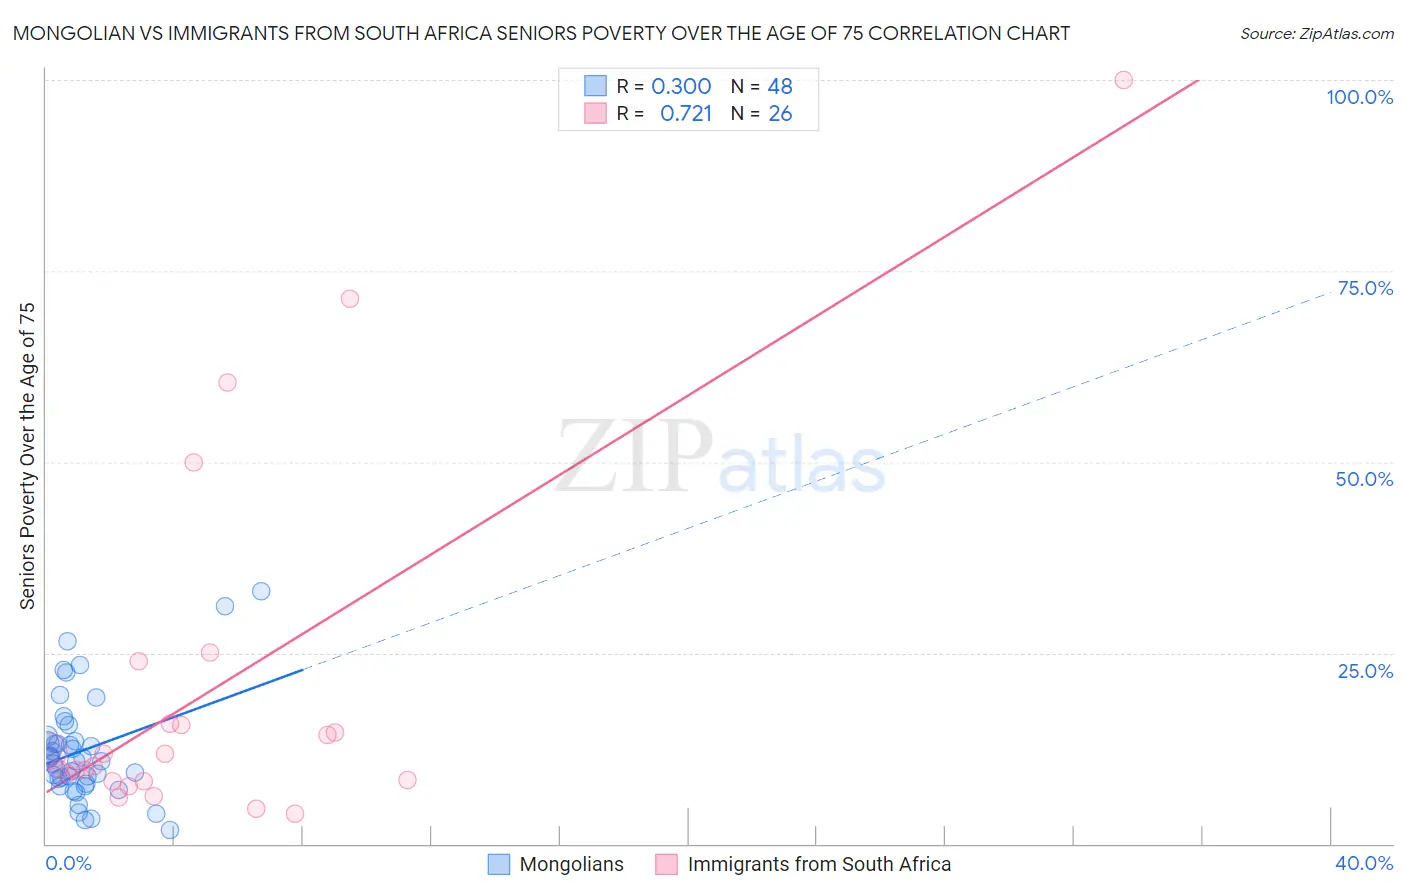 Mongolian vs Immigrants from South Africa Seniors Poverty Over the Age of 75